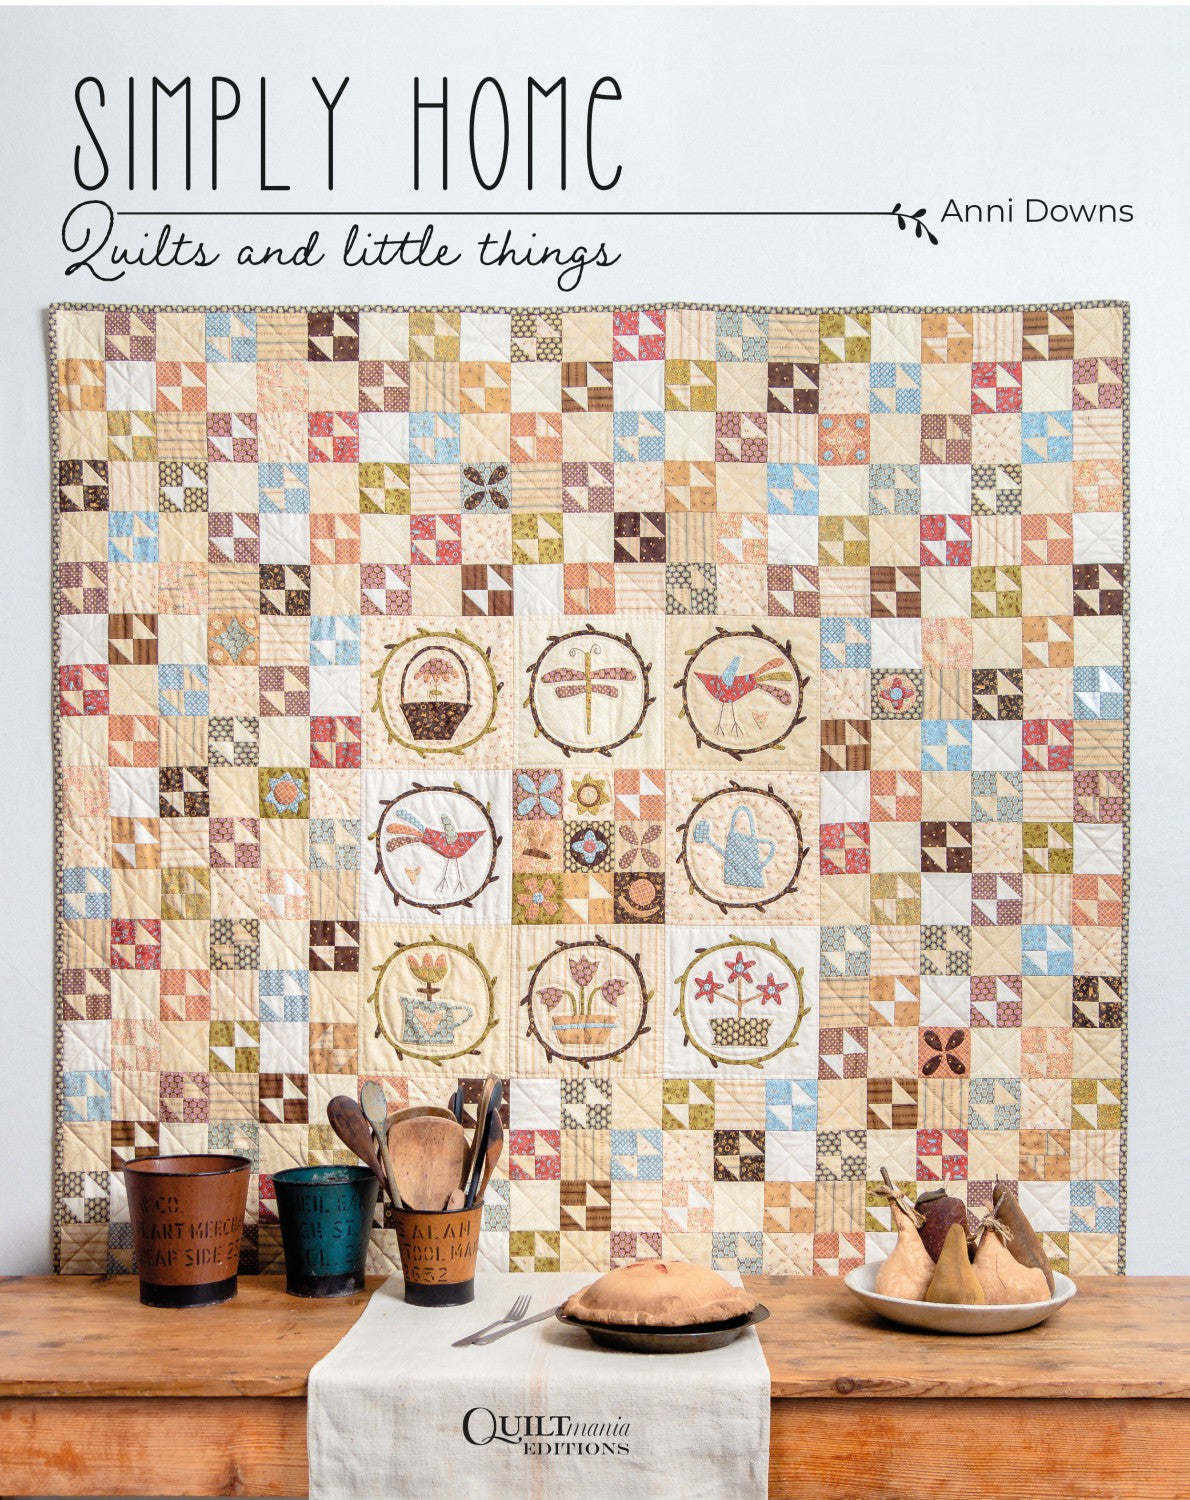 Simply Home Quilts & Little Things by Anni Downs